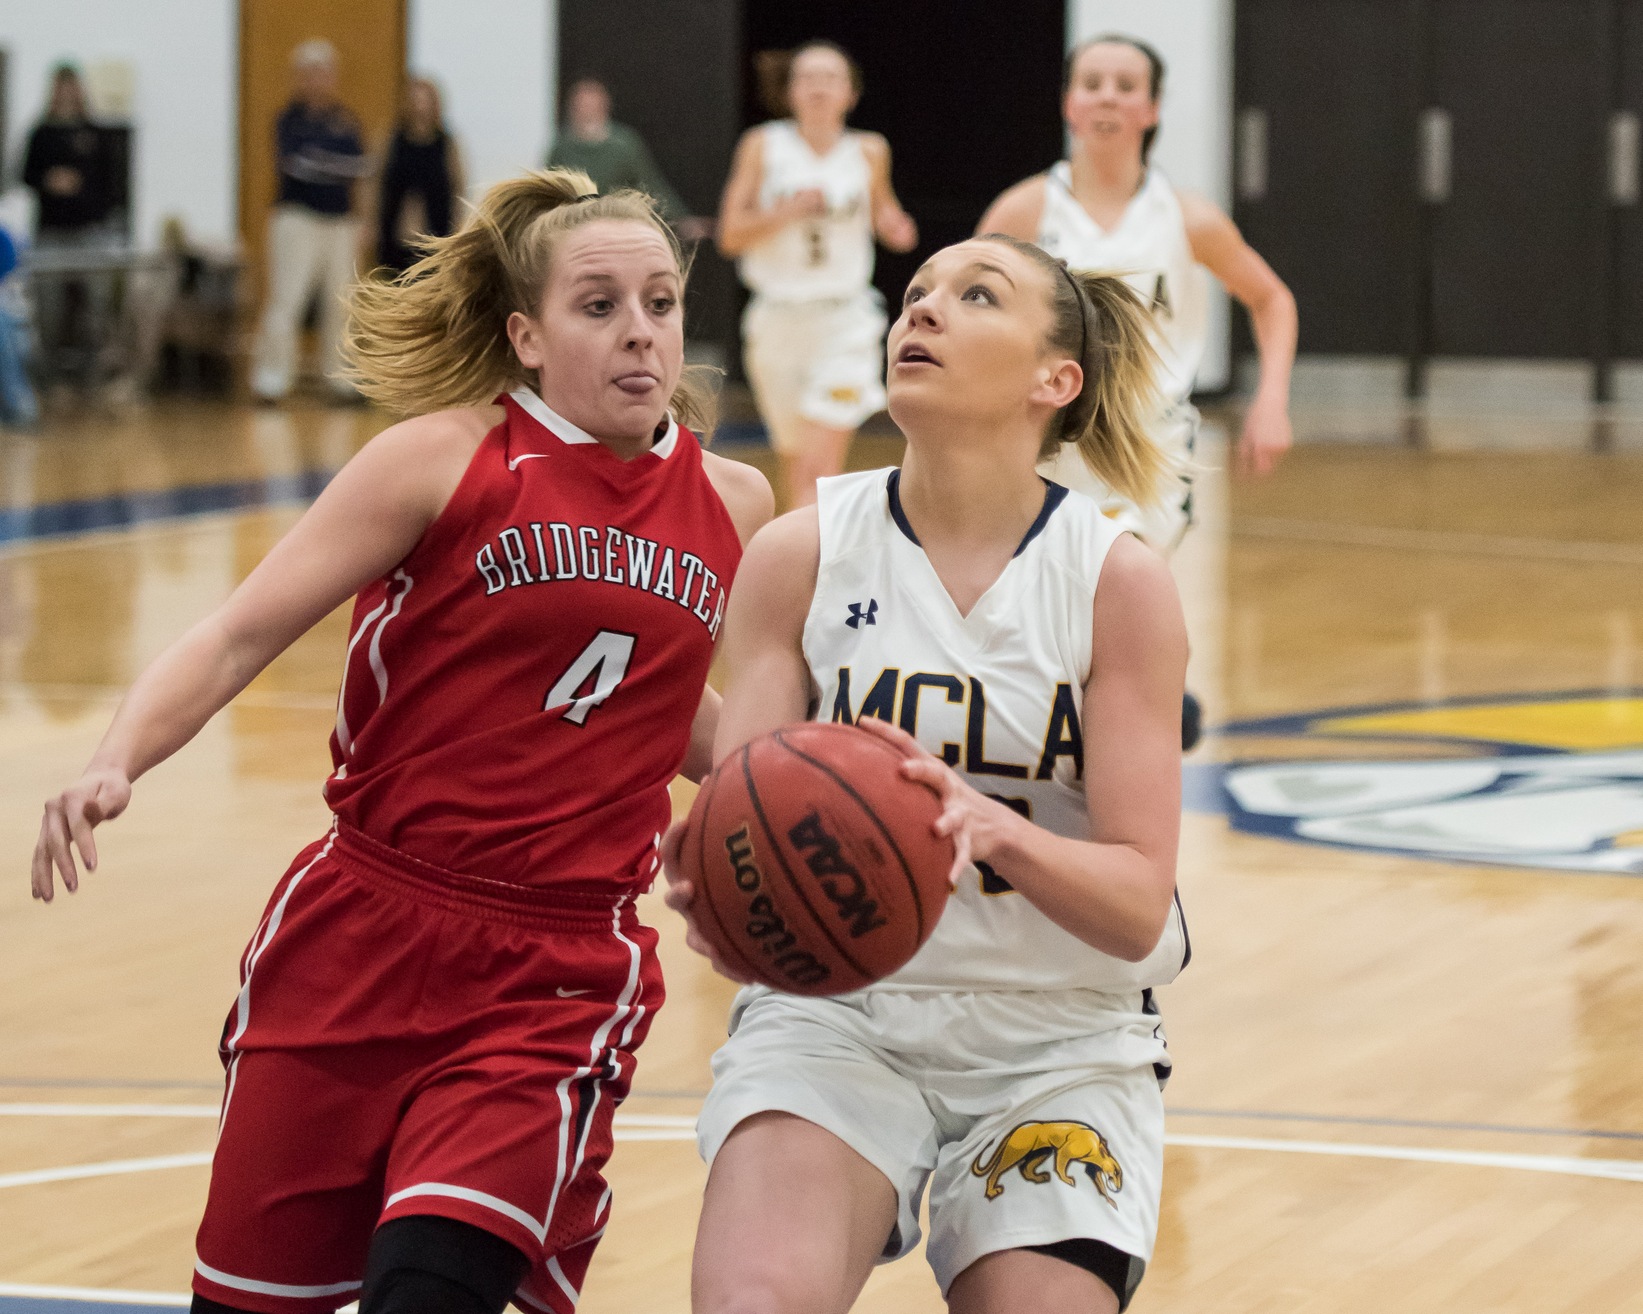 Women's Basketball tripped up by Vikings 59-53 in MASCAC action